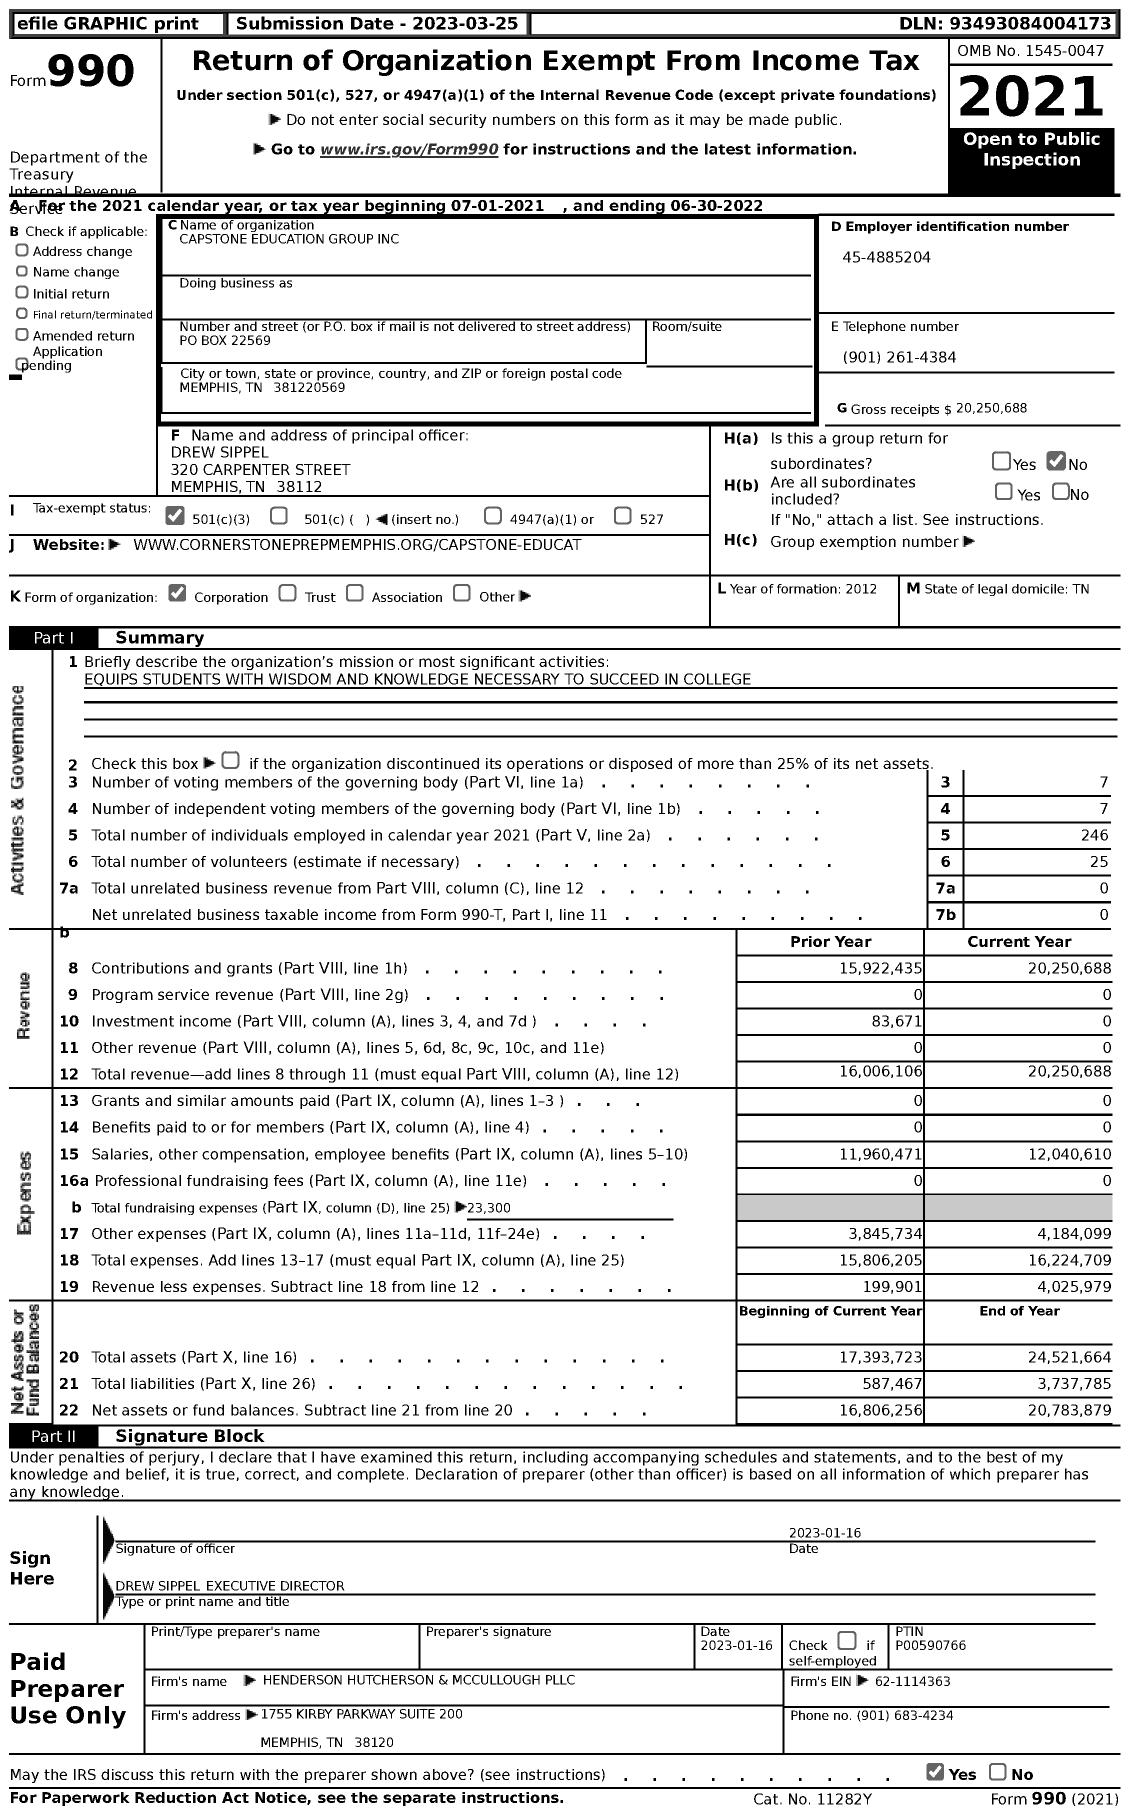 Image of first page of 2021 Form 990 for Capstone Education Group (CEG)